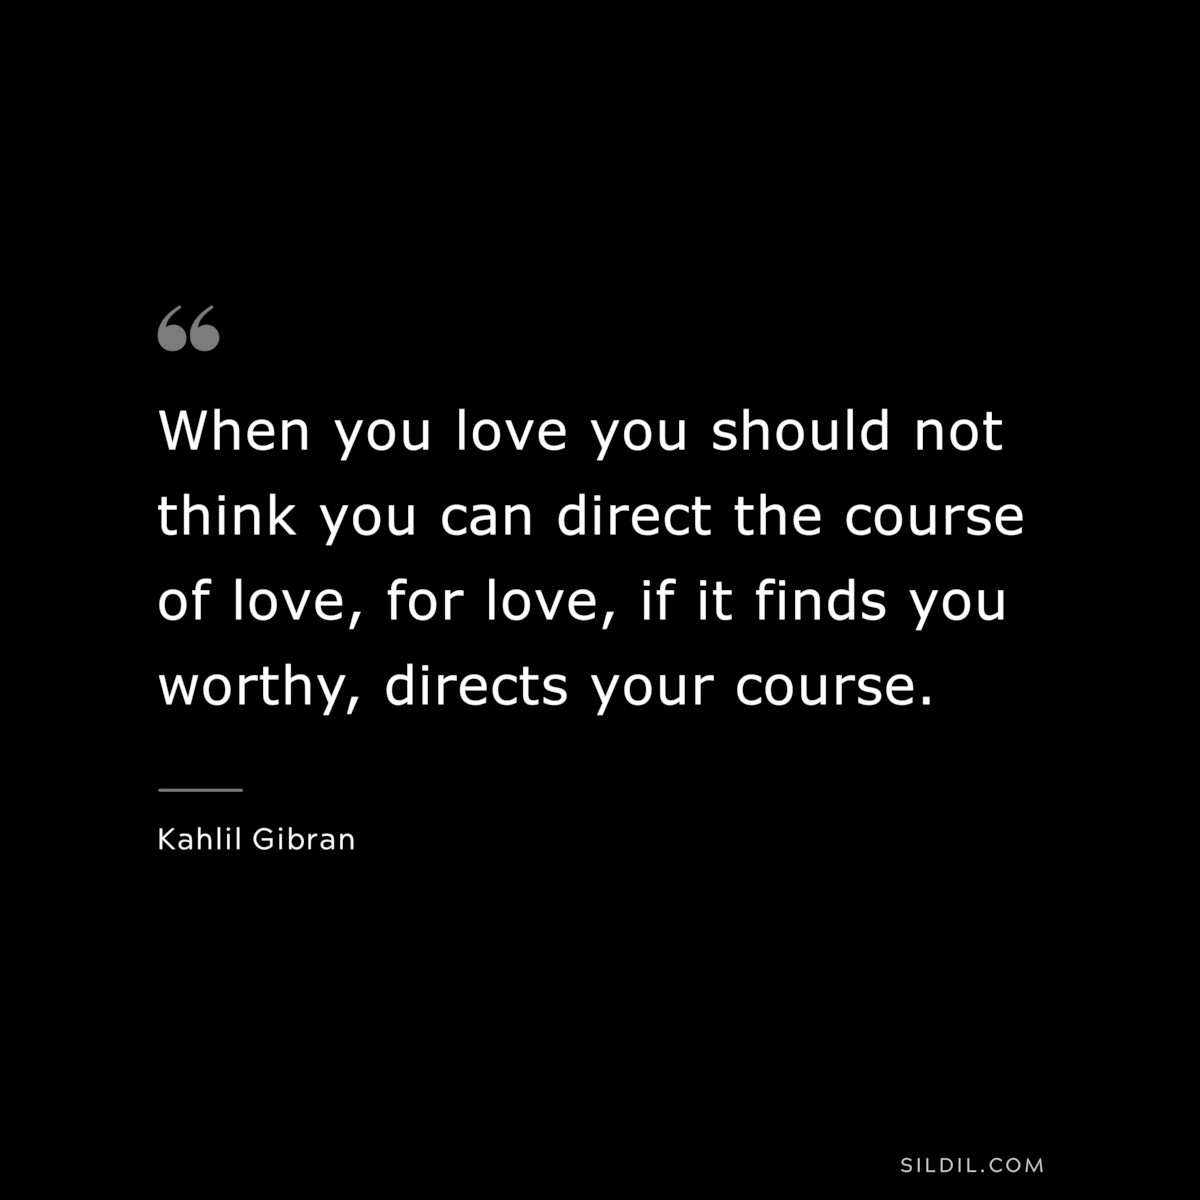 When you love you should not think you can direct the course of love, for love, if it finds you worthy, directs your course. ― Kahlil Gibran